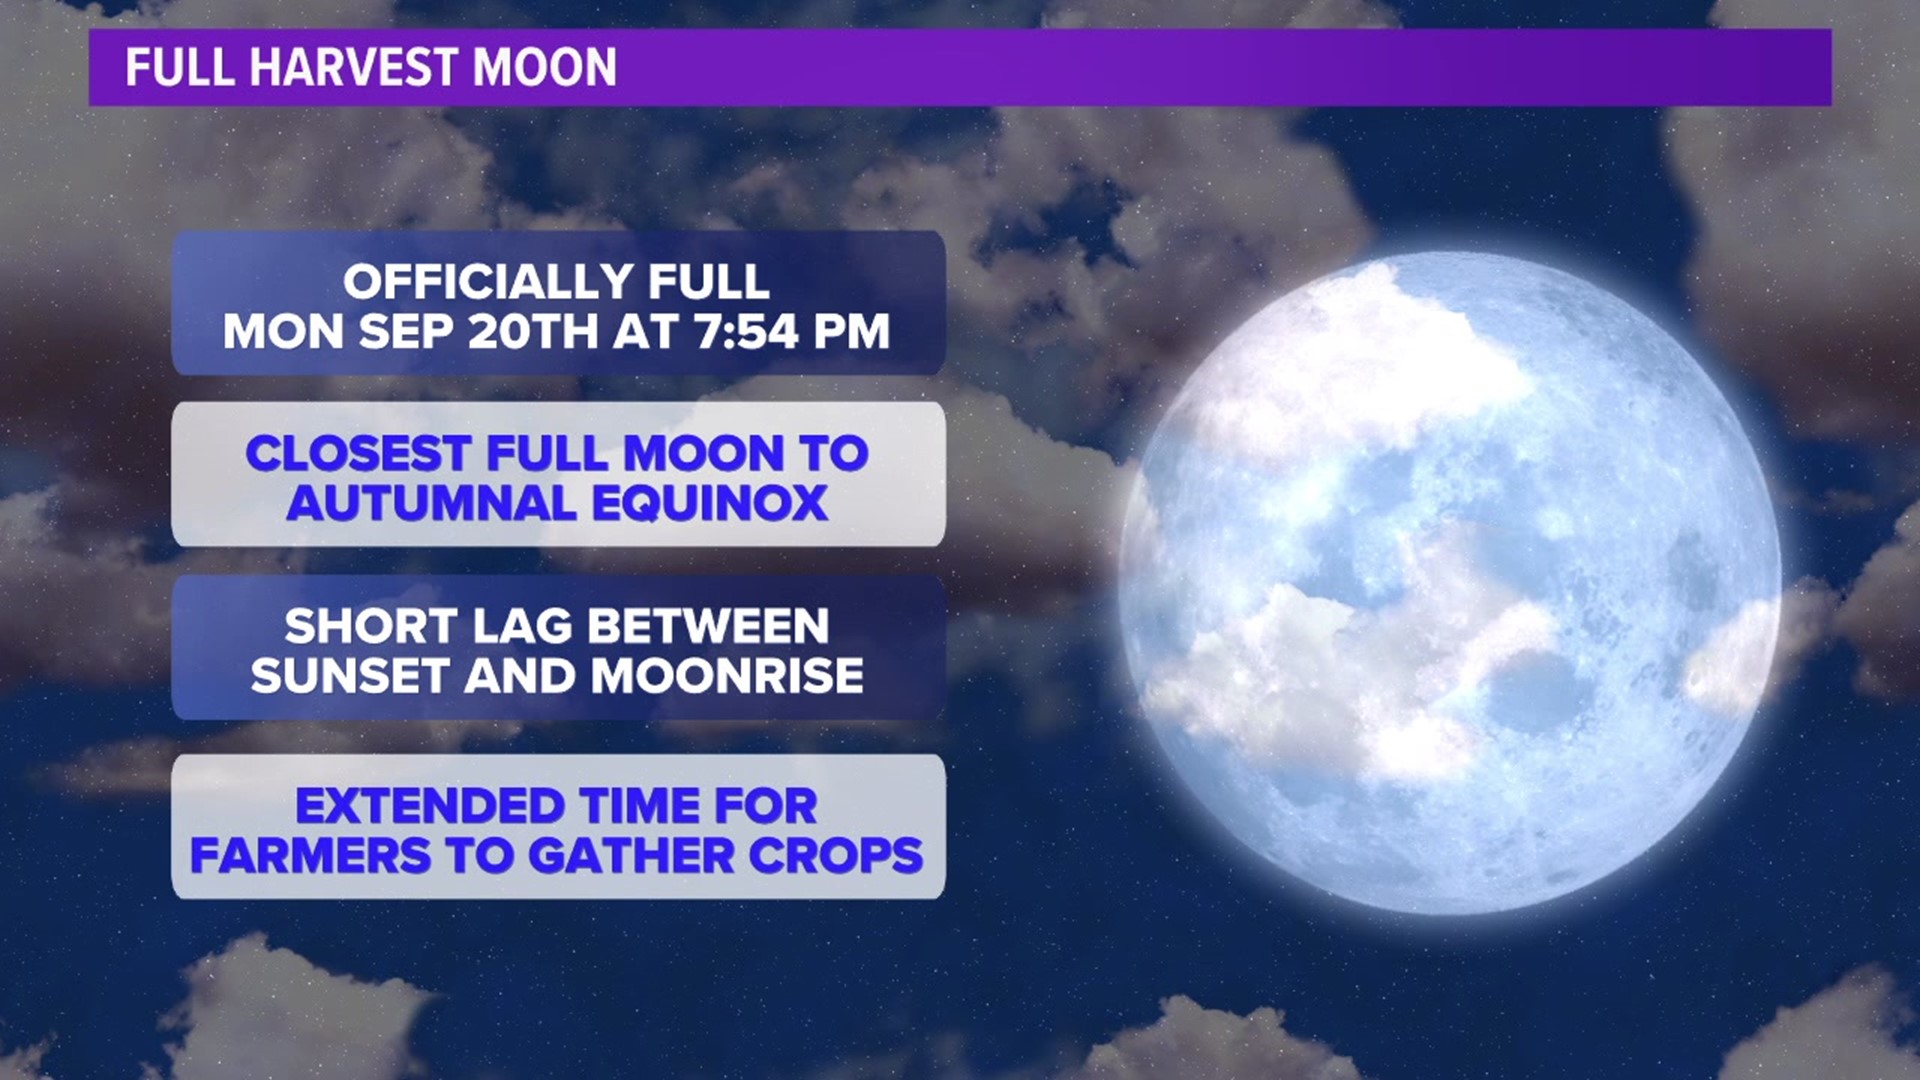 It's almost time for the Harvest Moon to show itself in the sky.